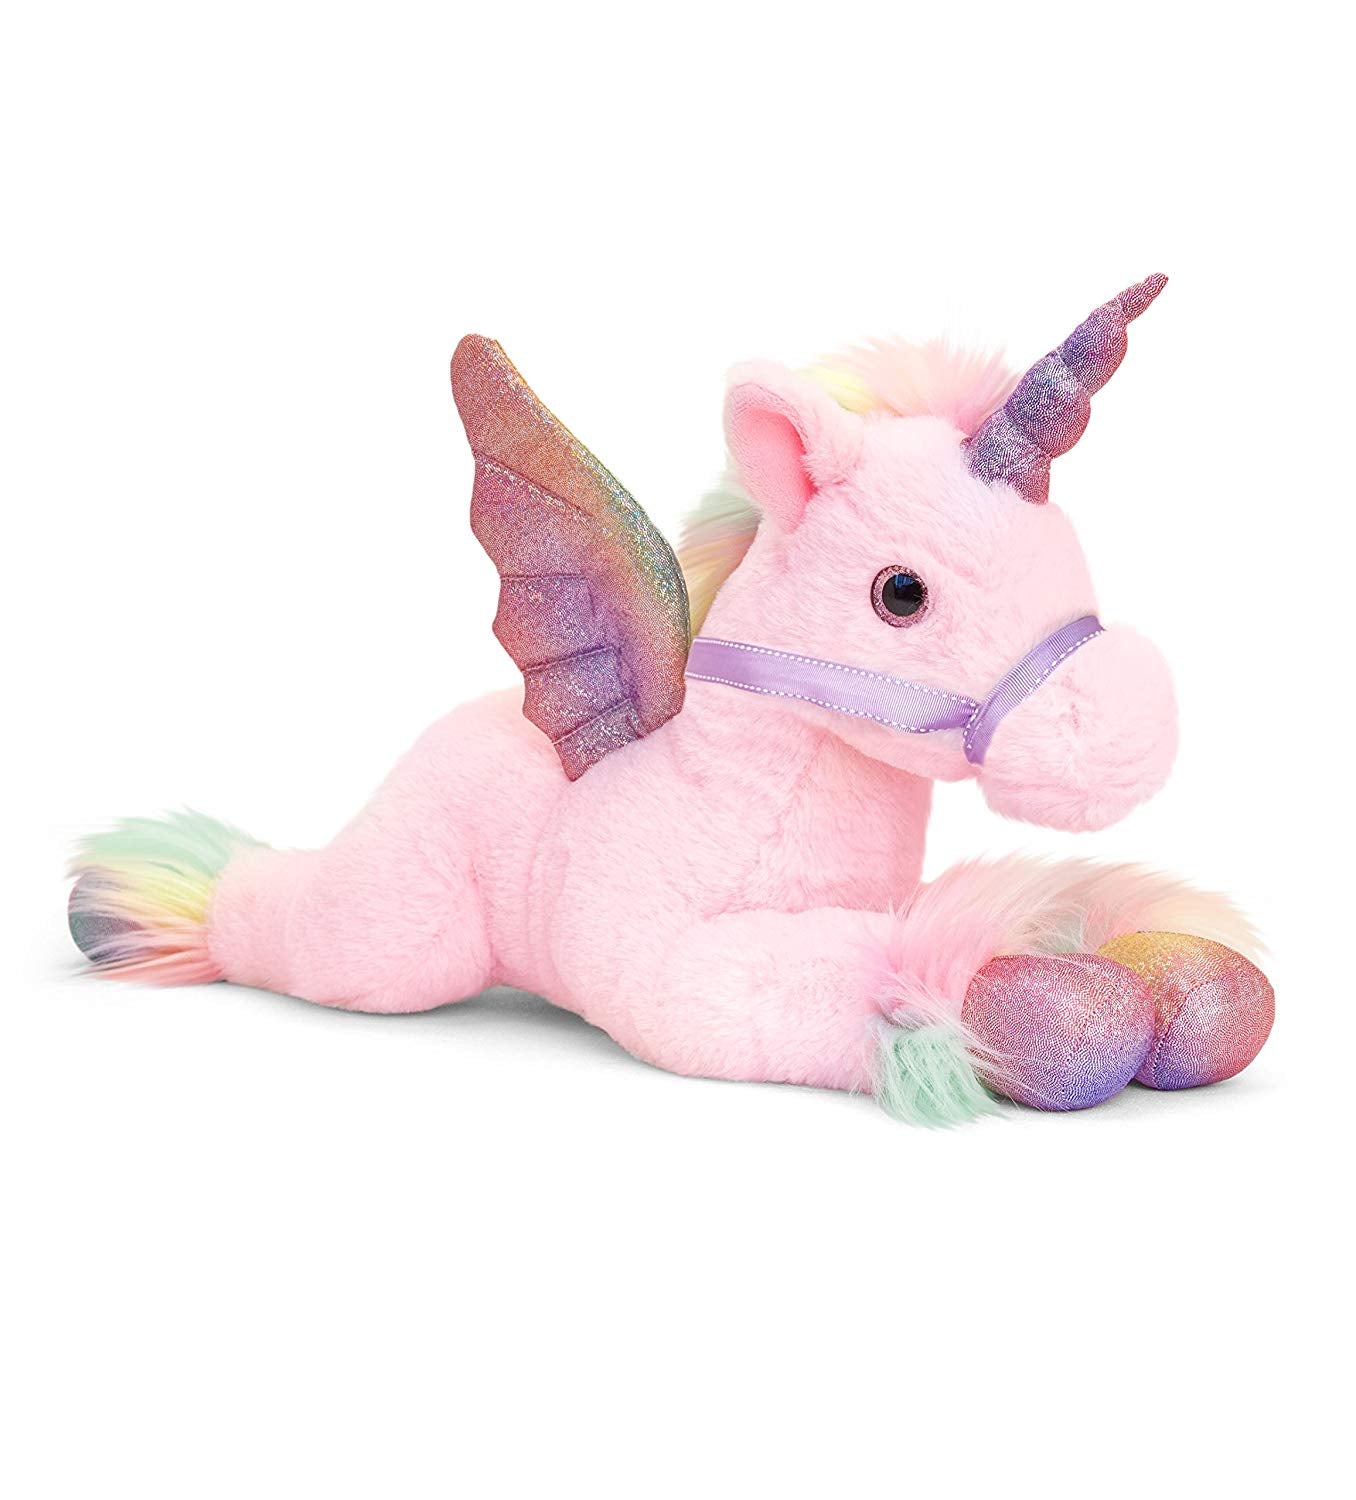 Keel Toys SF2122AMA Soft Toy, Pink, 70 cm - hanrattycraftsgifts.co.uk